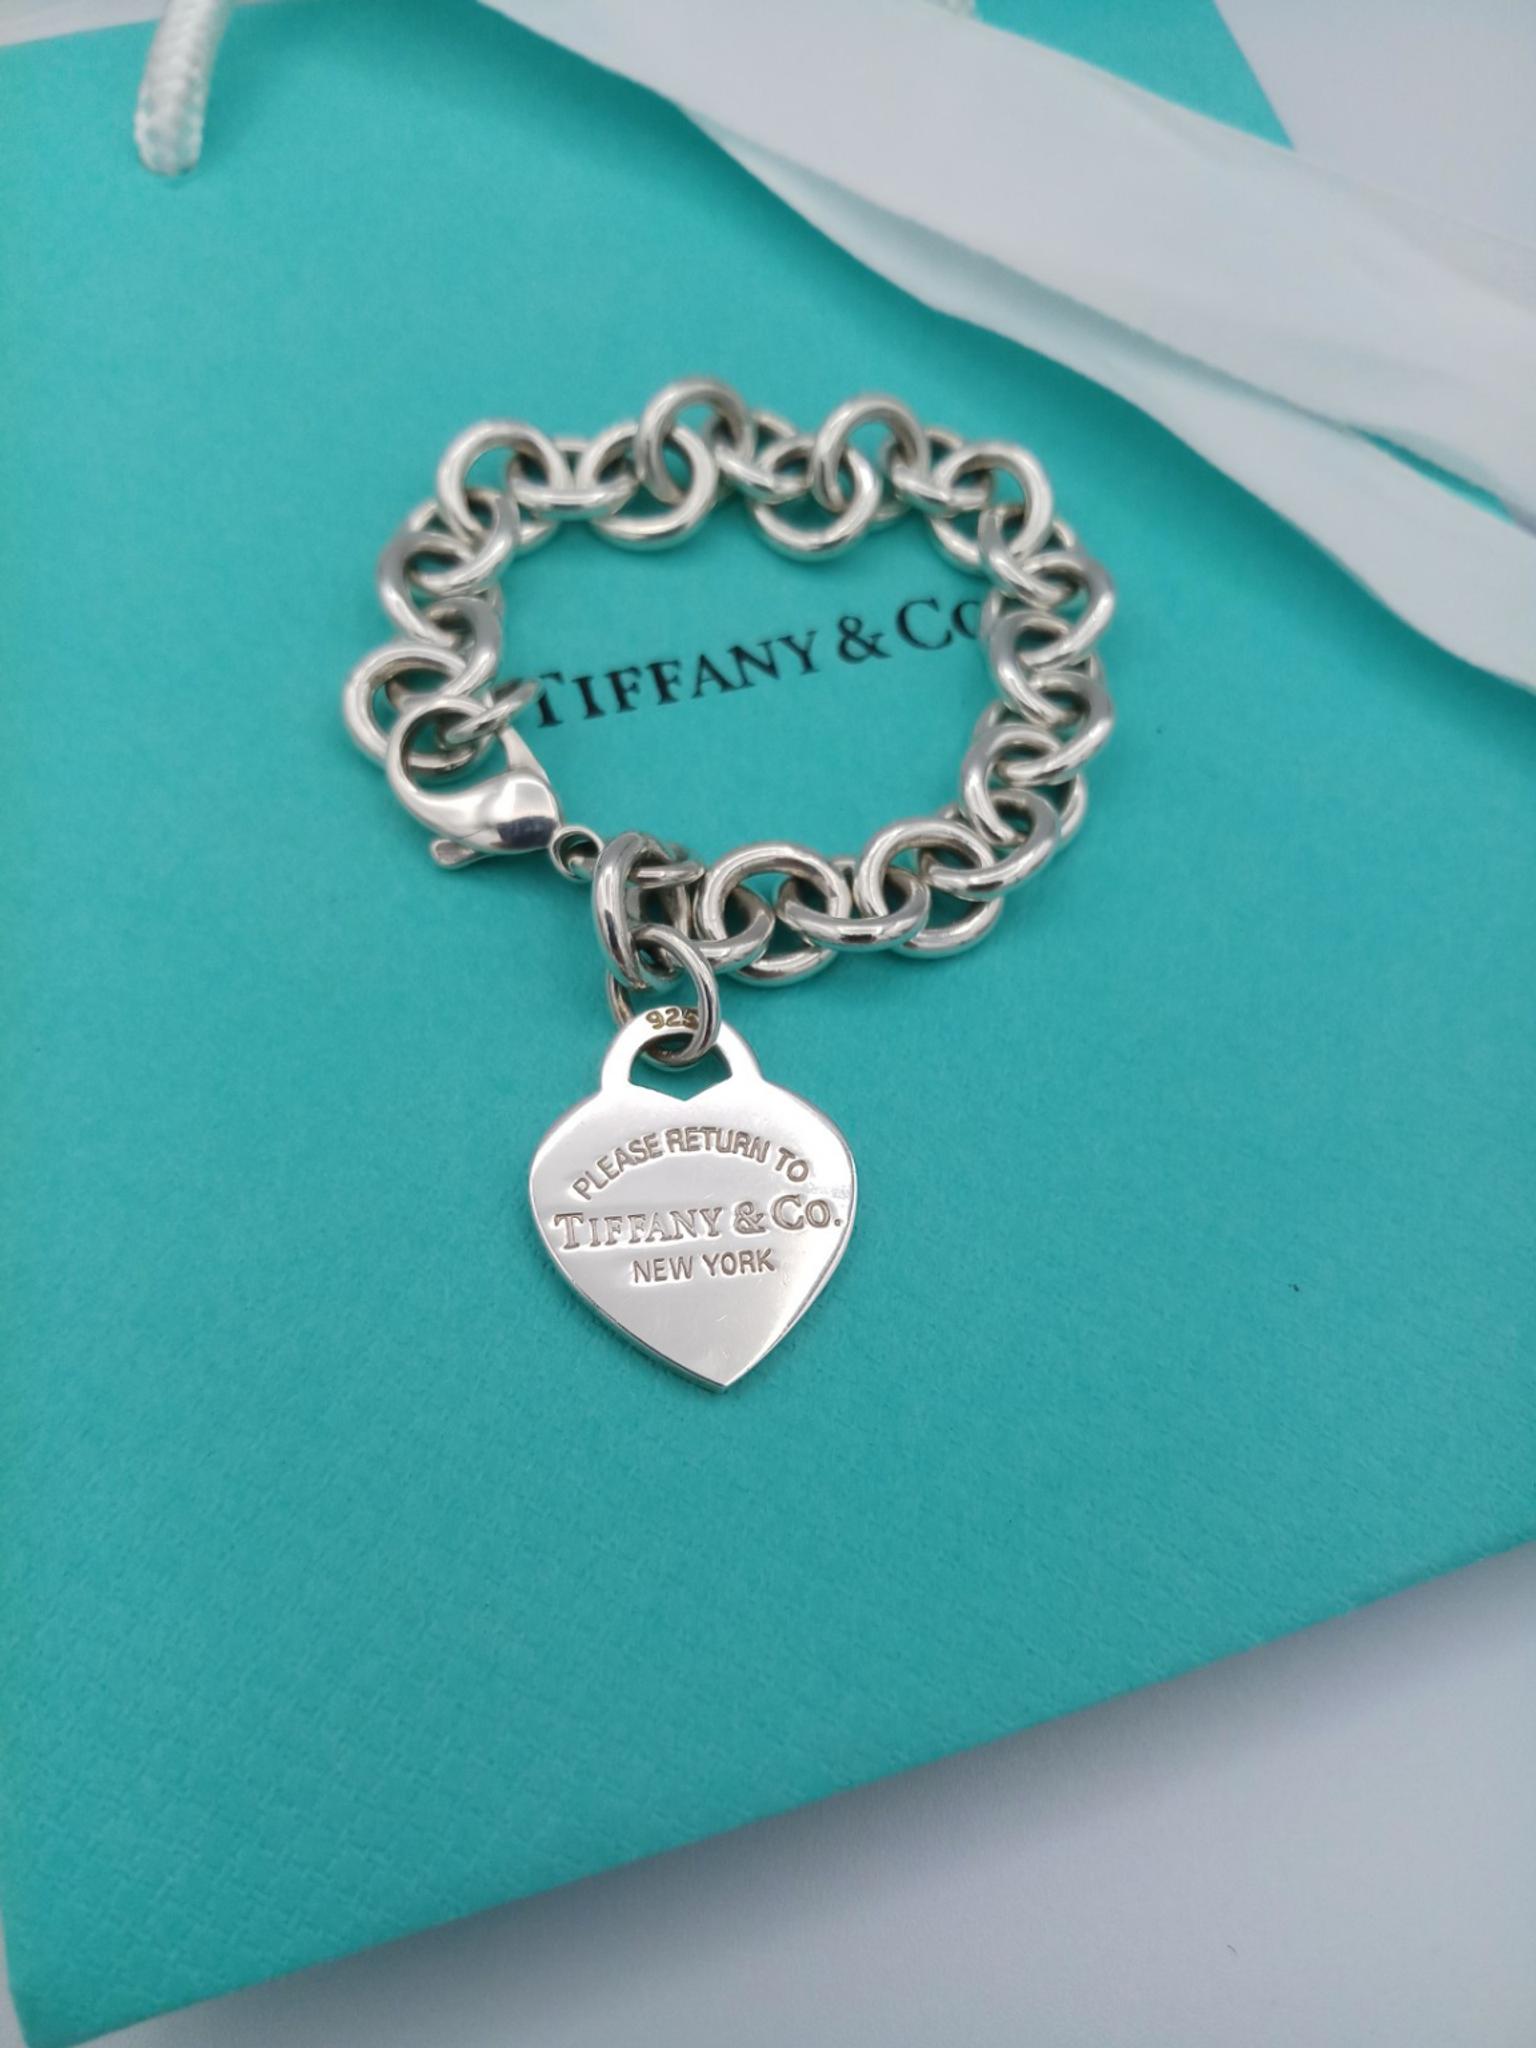 Tiffany & Co. Bracelet with A Heart Pendant in NE5 Tyne for £140.00 for ...